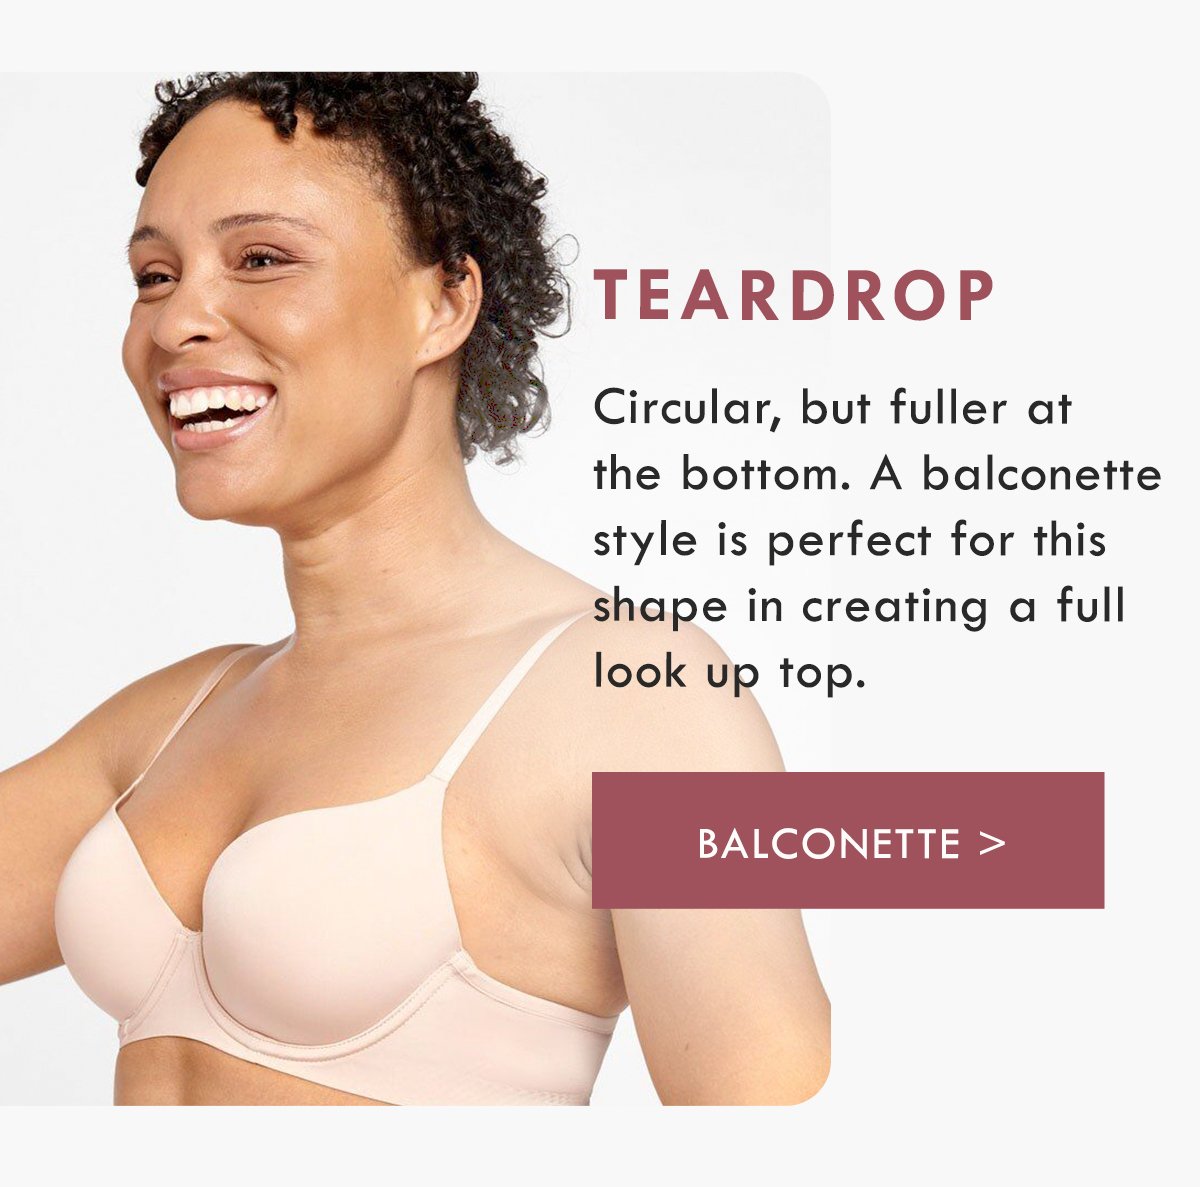 Berlei: Bra chat: Why your breast shape matters.